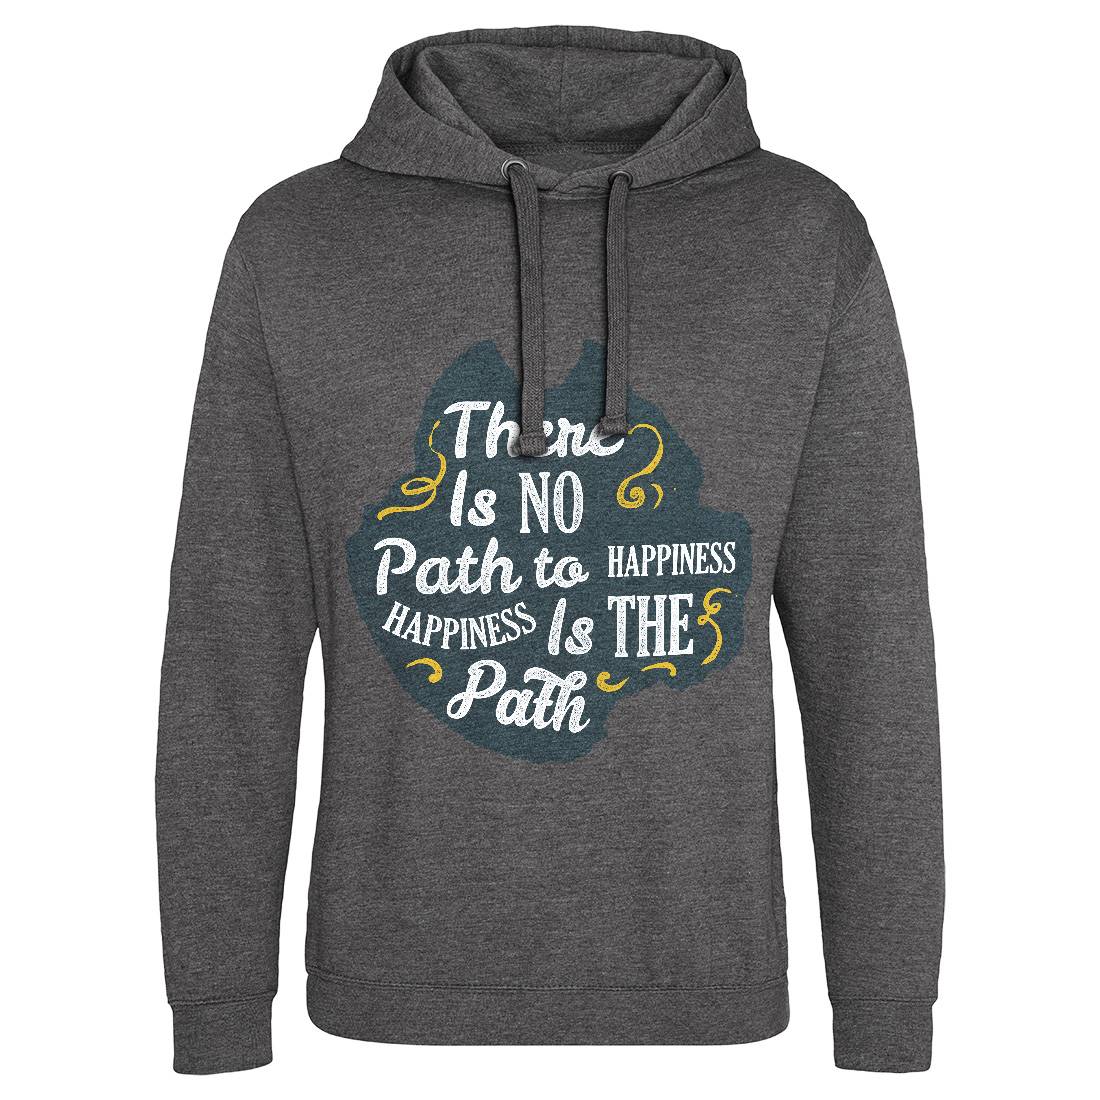 There Is No Path Mens Hoodie Without Pocket Religion A387